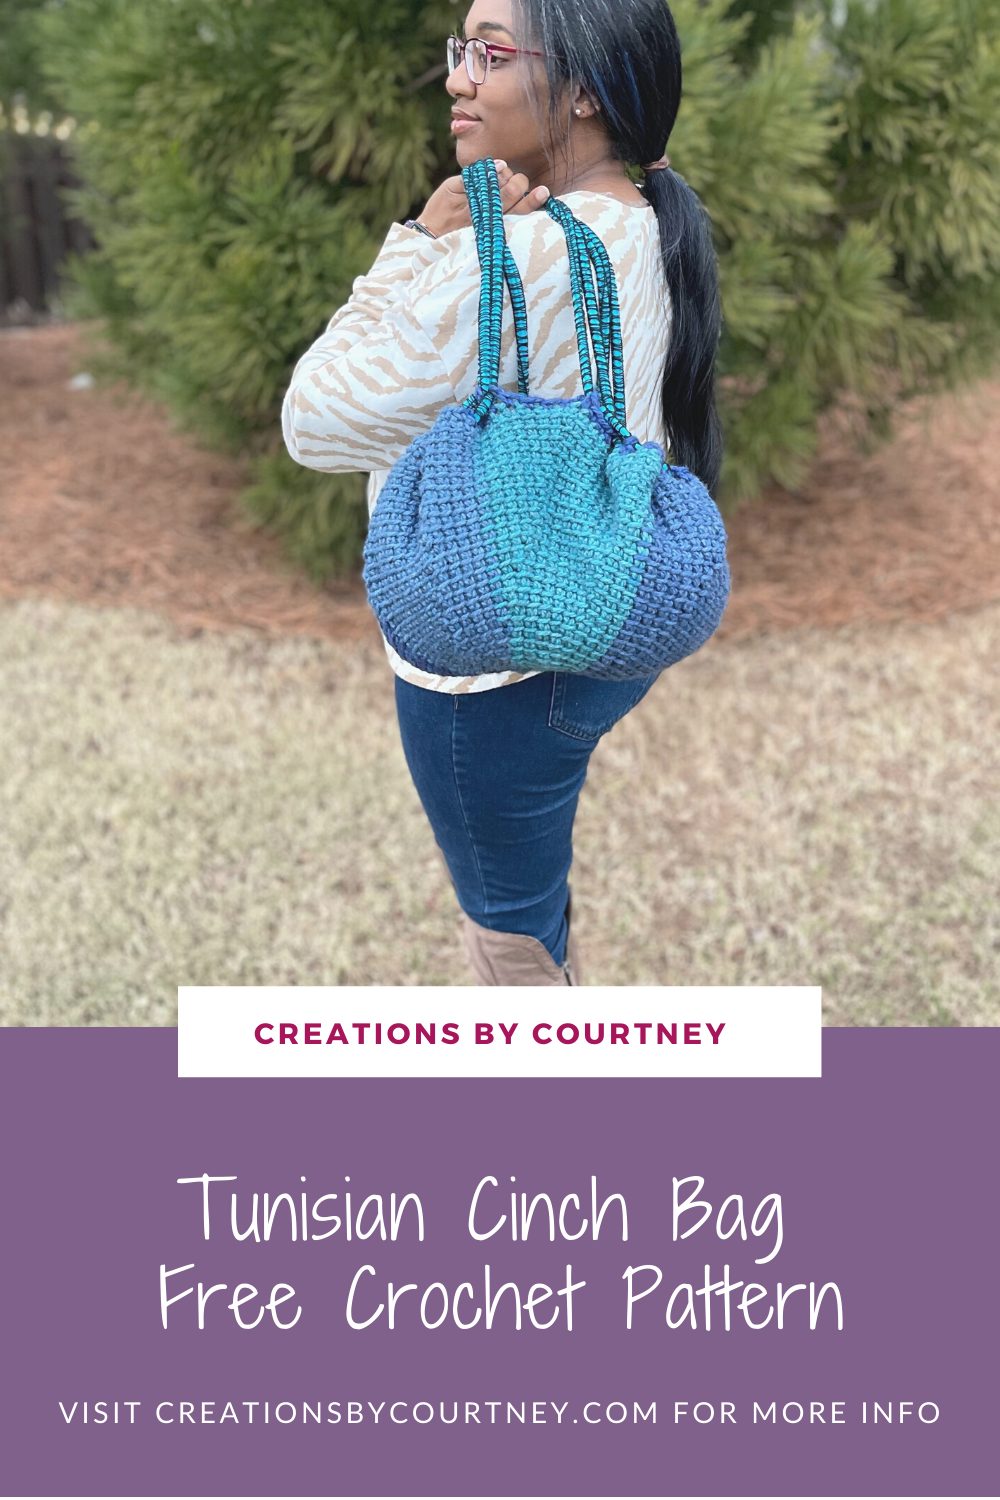 The Tunisian Cinch Bag is a free crochet pattern made with super bulky yarn and a 9mm tunisian crochet hook. This bag is made from a circle that can be cinched for carrying yarn, toys or anything when you're on the go.